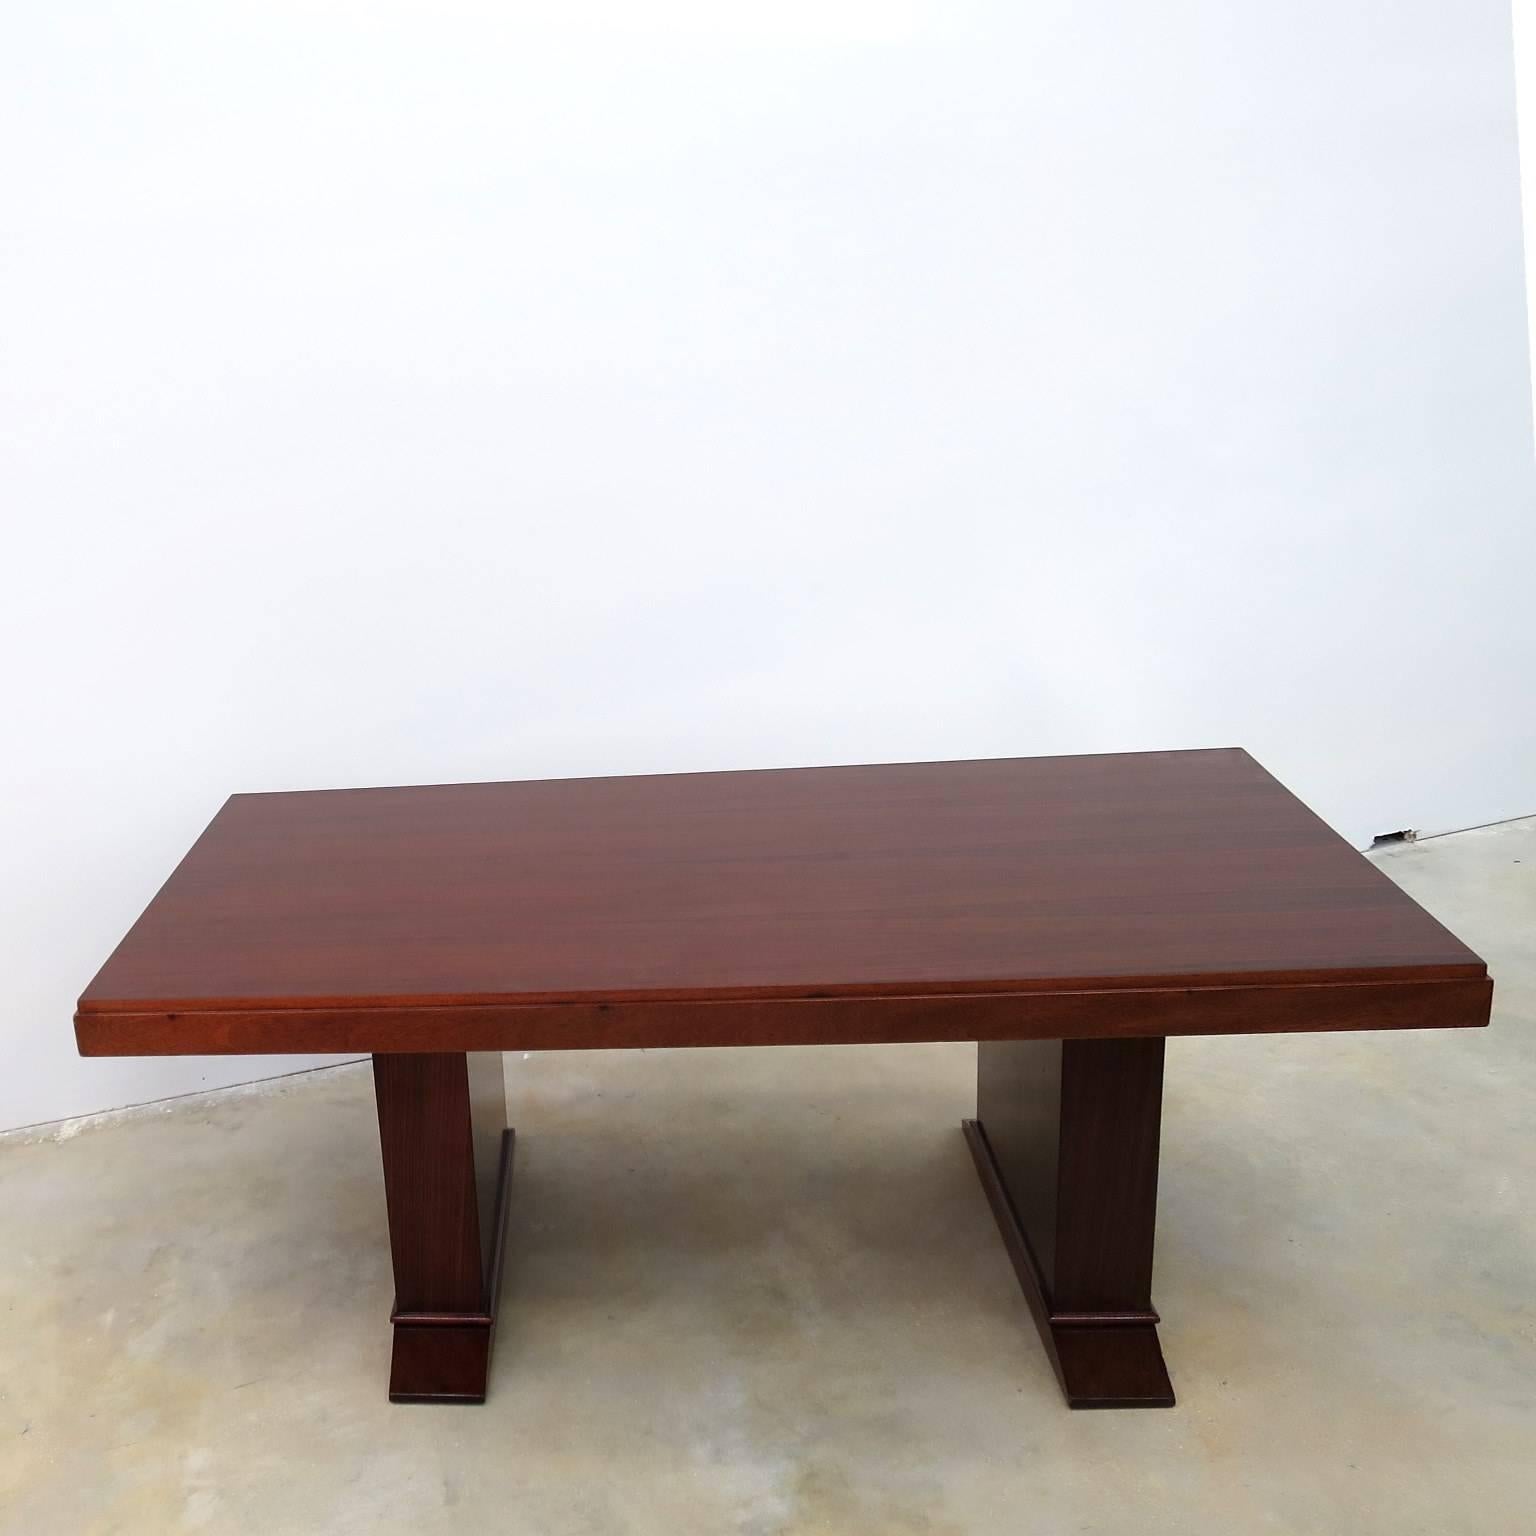 French Art Deco table in mahogany, very strict and elegant design.
Extensions possible at each bottom.